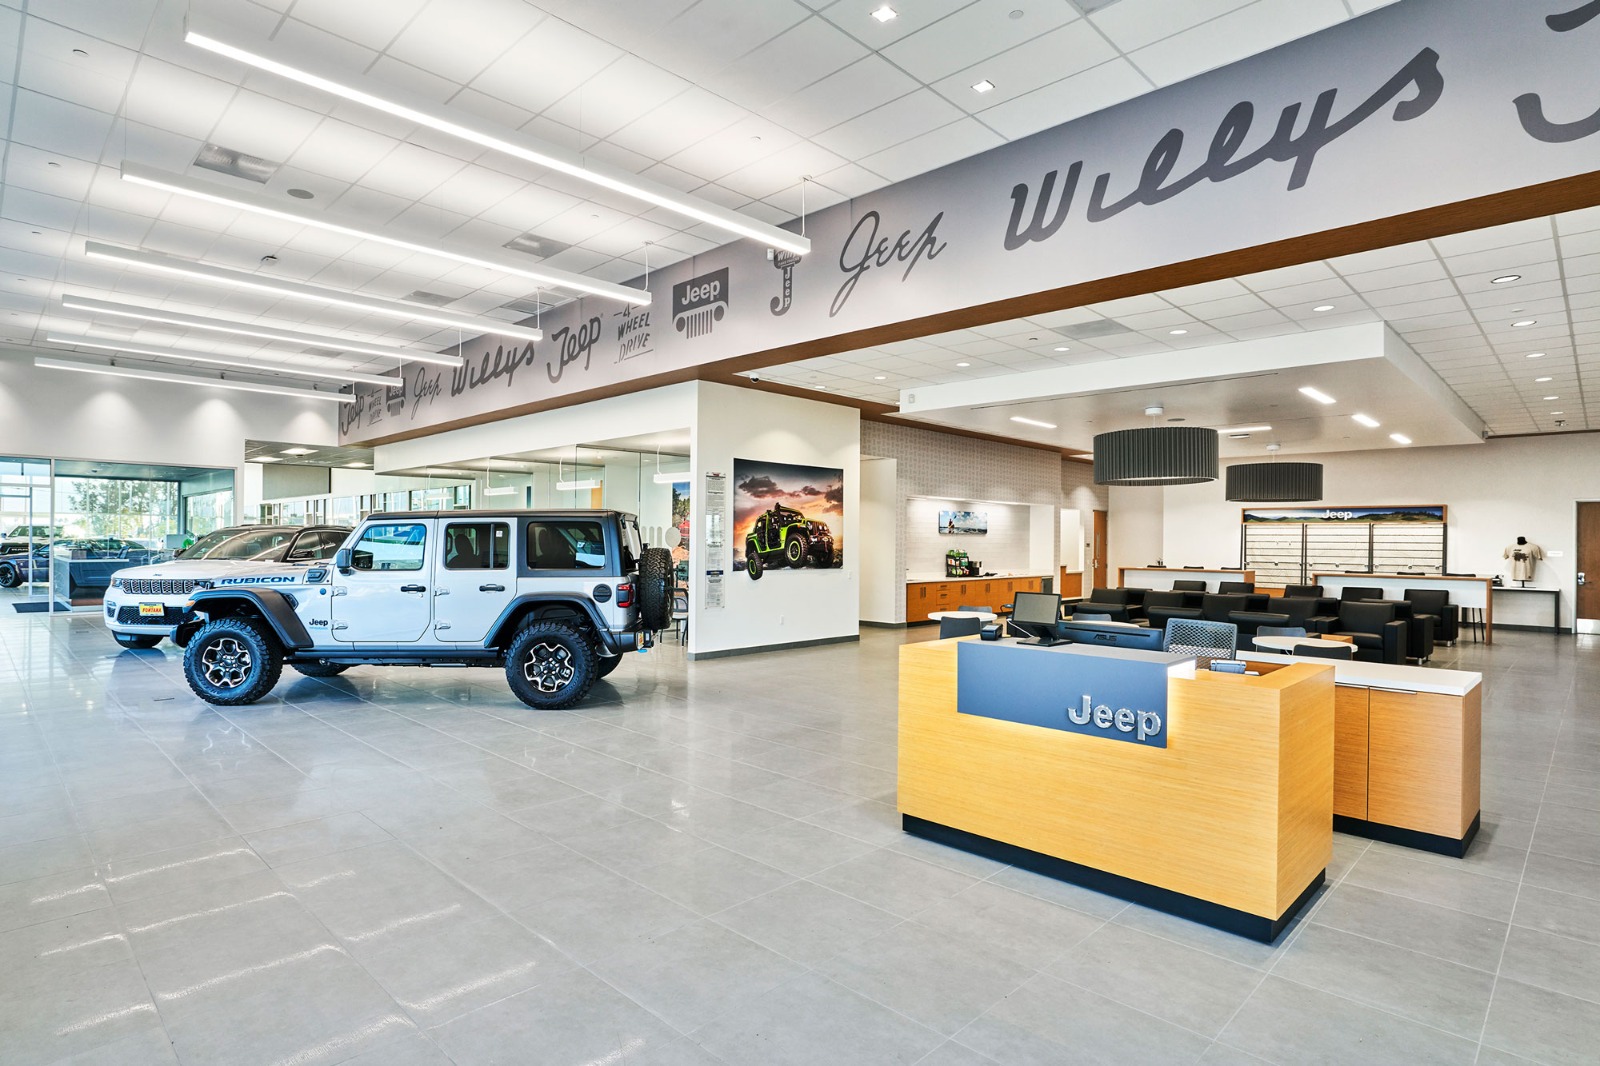 Featured image for “Fontana Chrysler Dodge Ram & Jeep”